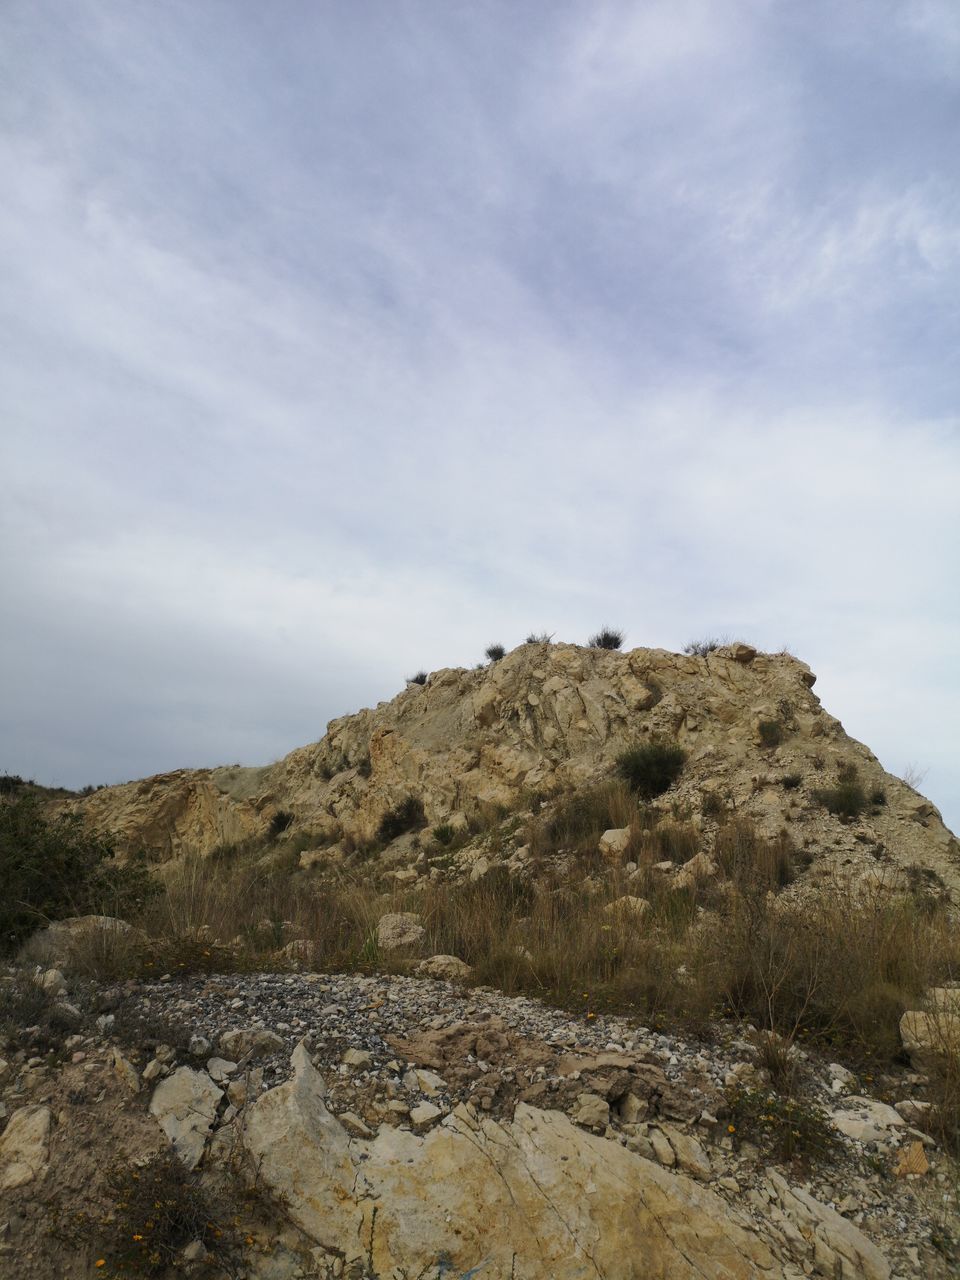 ROCK FORMATIONS ON LAND